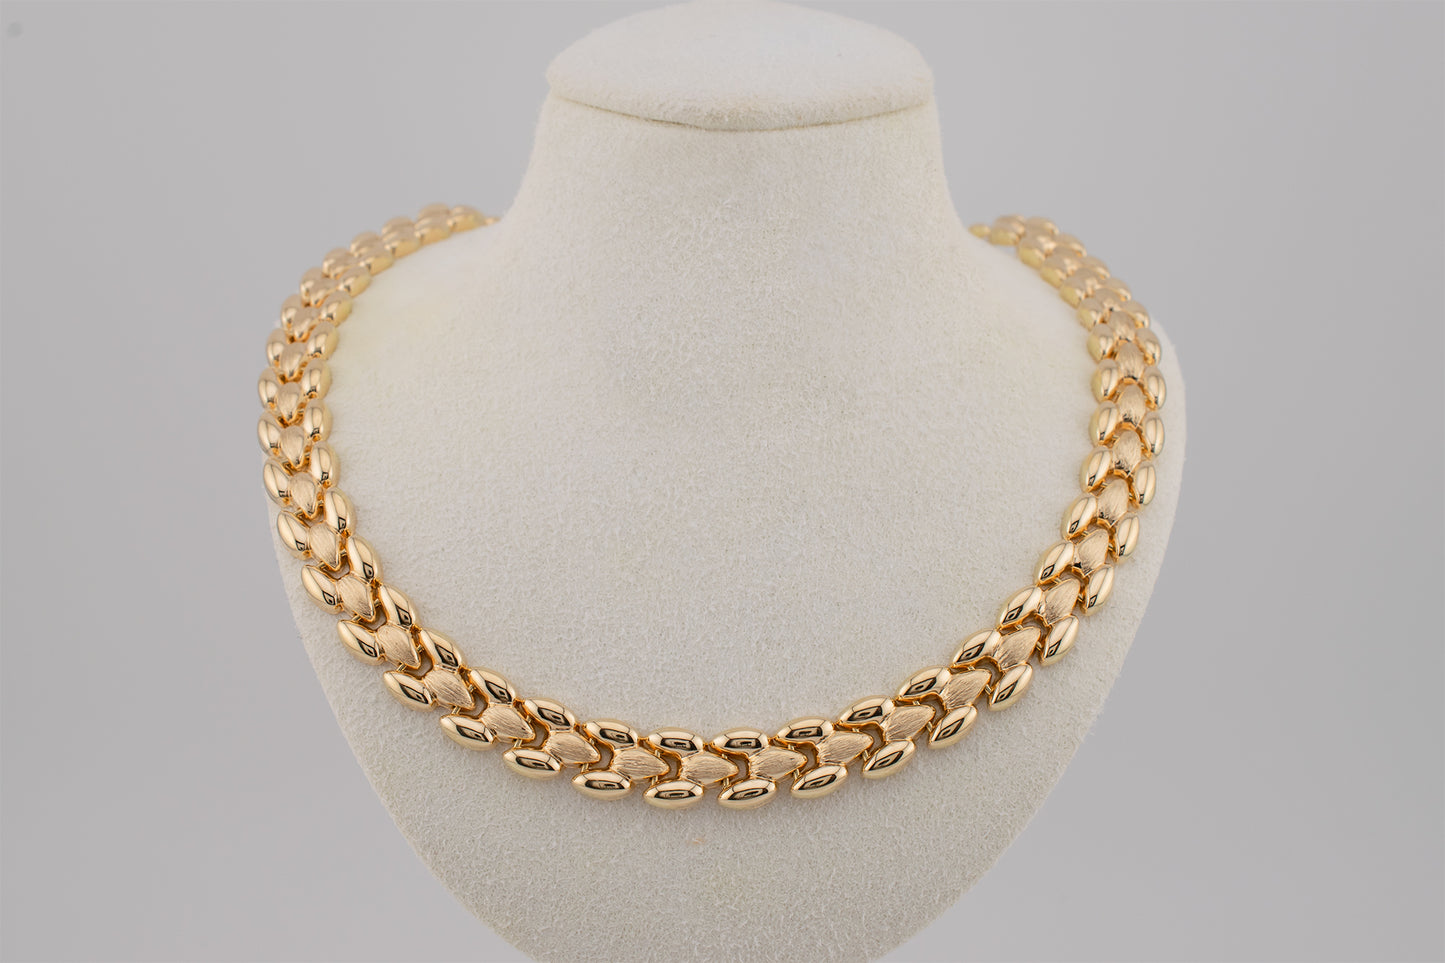 Vintage Estate 14KT Yellow Gold Italian Panther Link High Polish And Brushed Finish Necklace 18 Inches 9mm